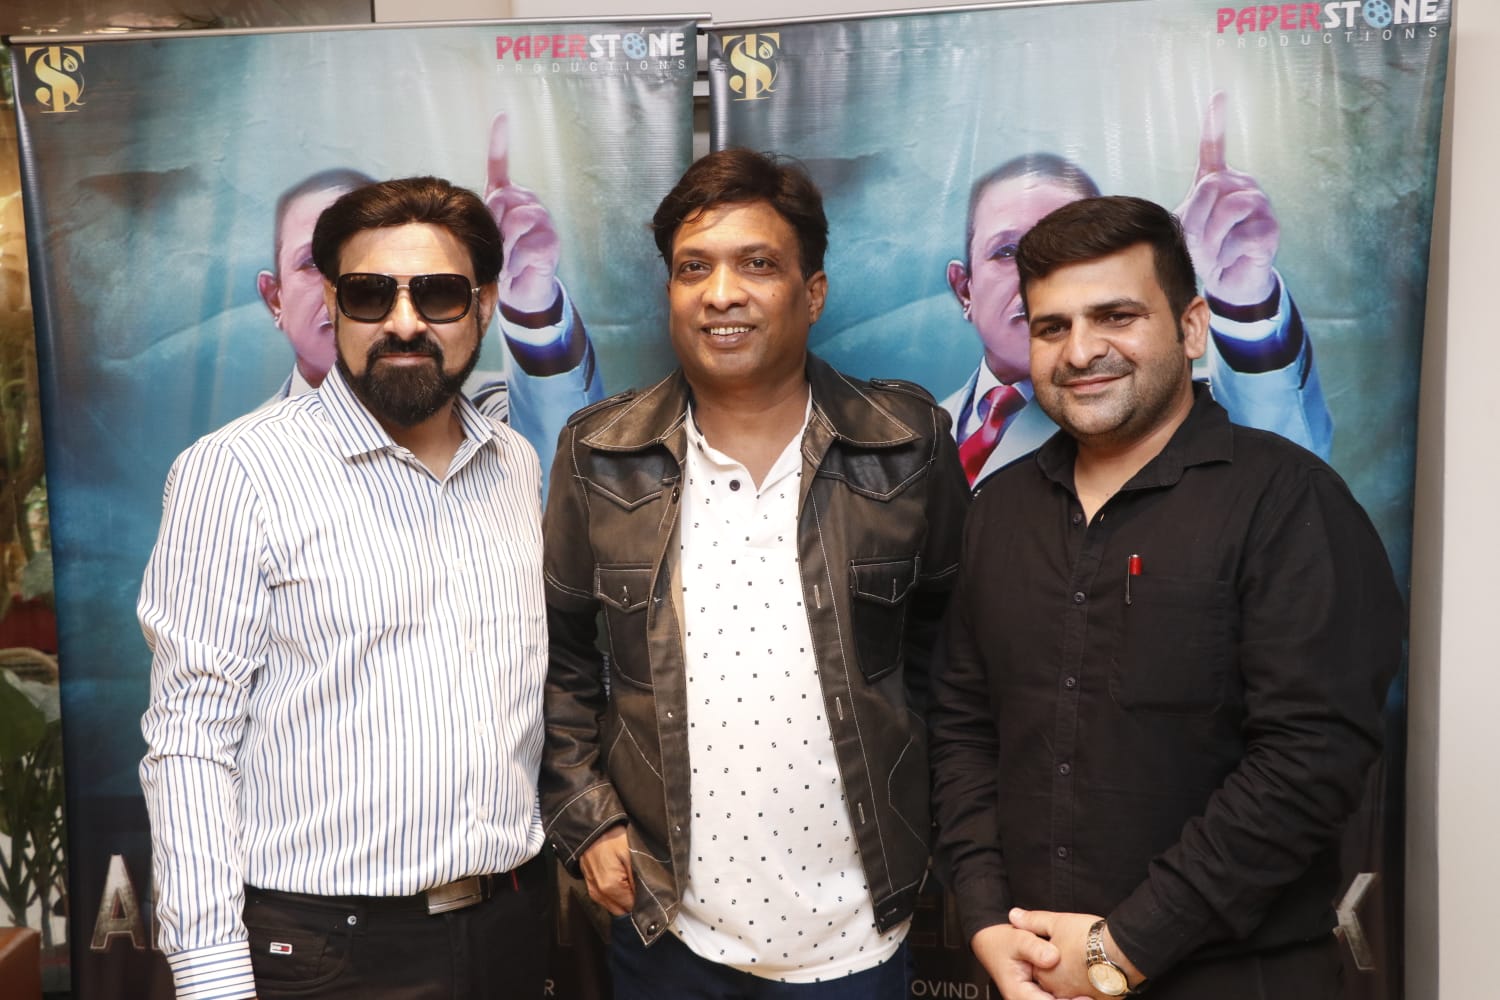 Vine Arora launched the Poster and trailer of his film “Alien Frank” among Bollywood celebrities in Mumbai